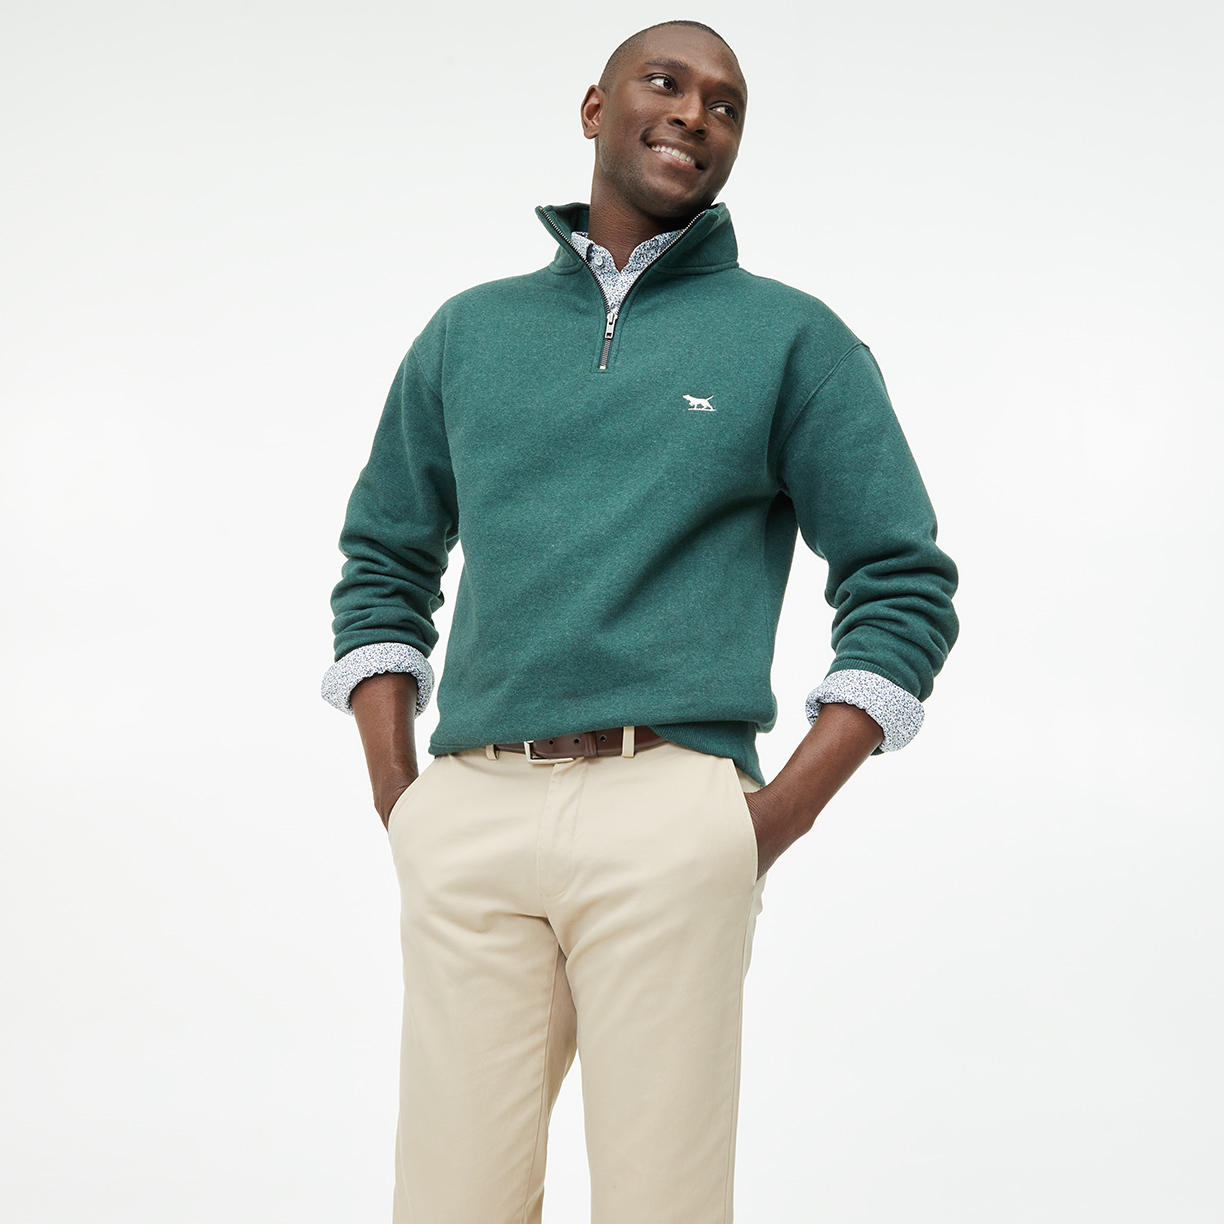 Men's Modern Spring Styles Up to 60% Off